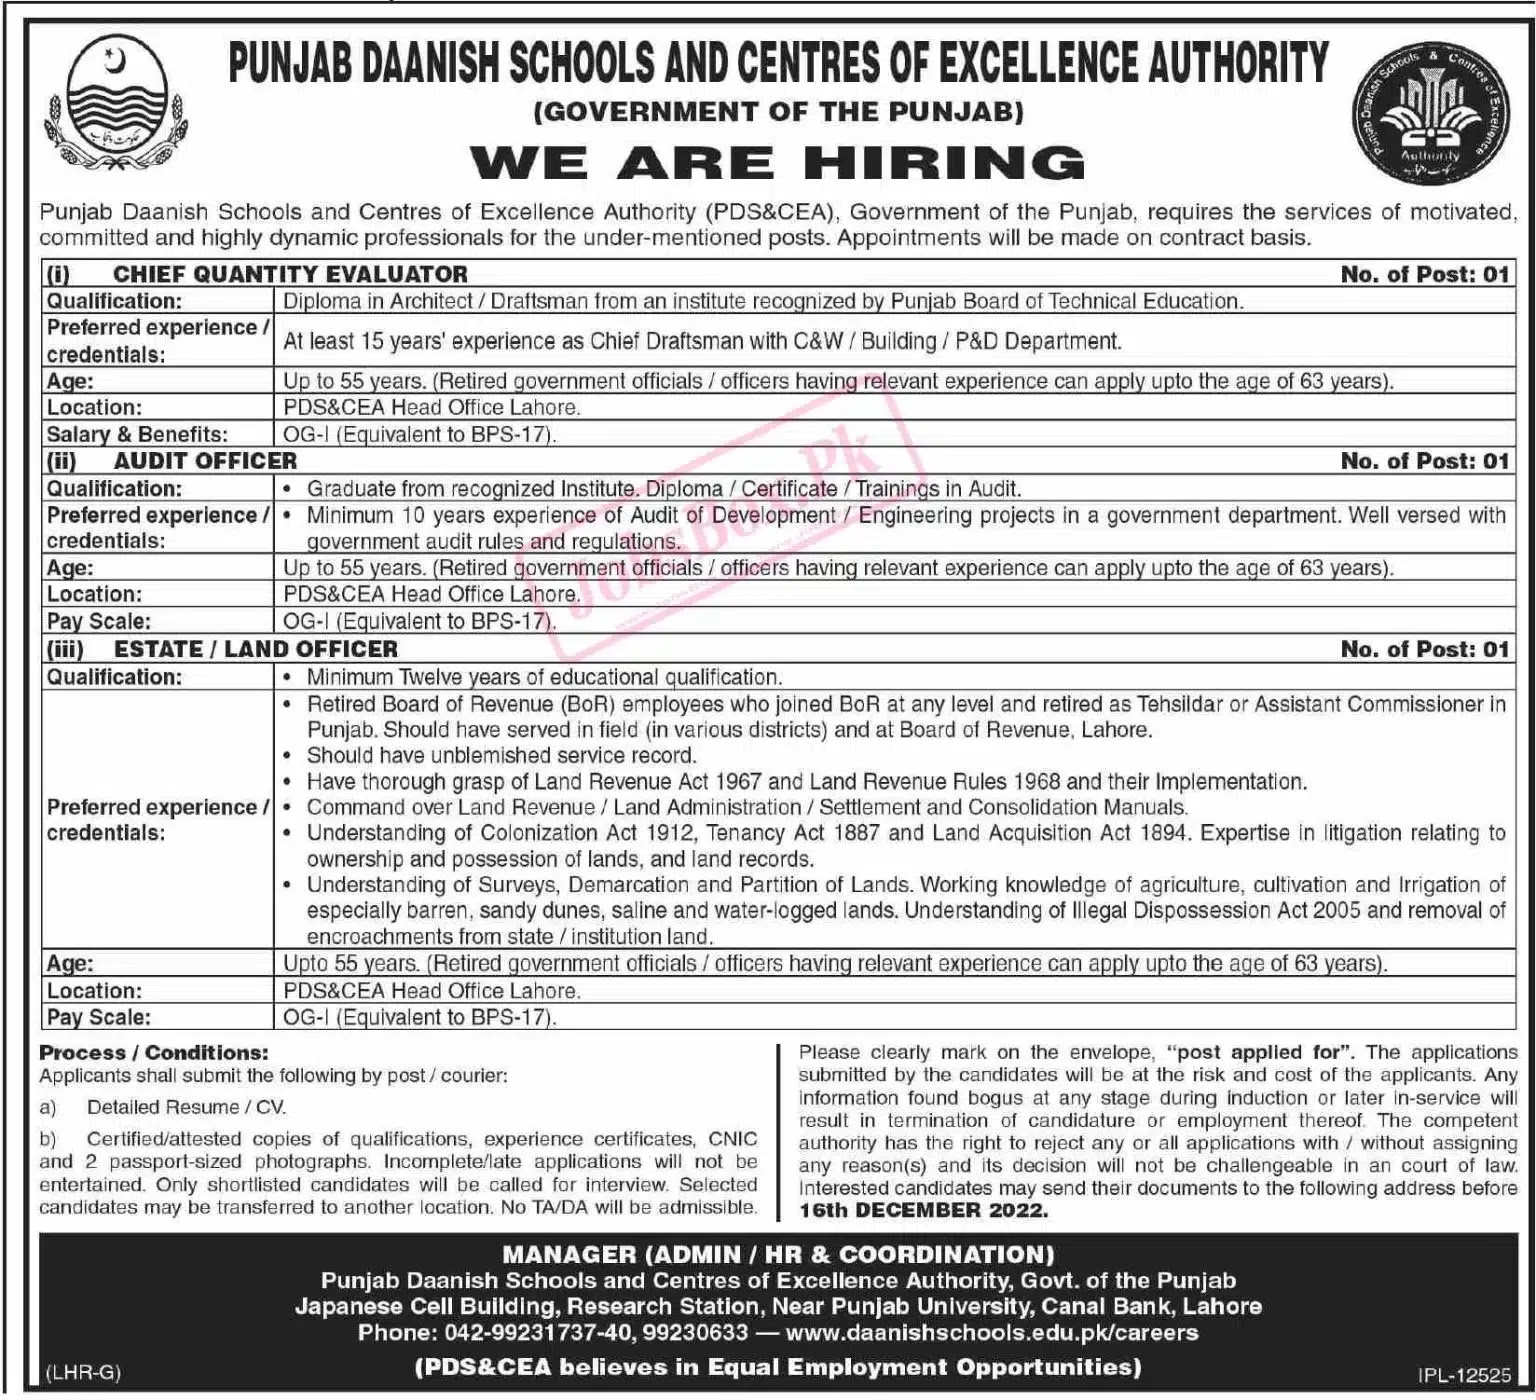 Punjab daanish school and center of excellence authority job 2022 – Latest Government Jobs